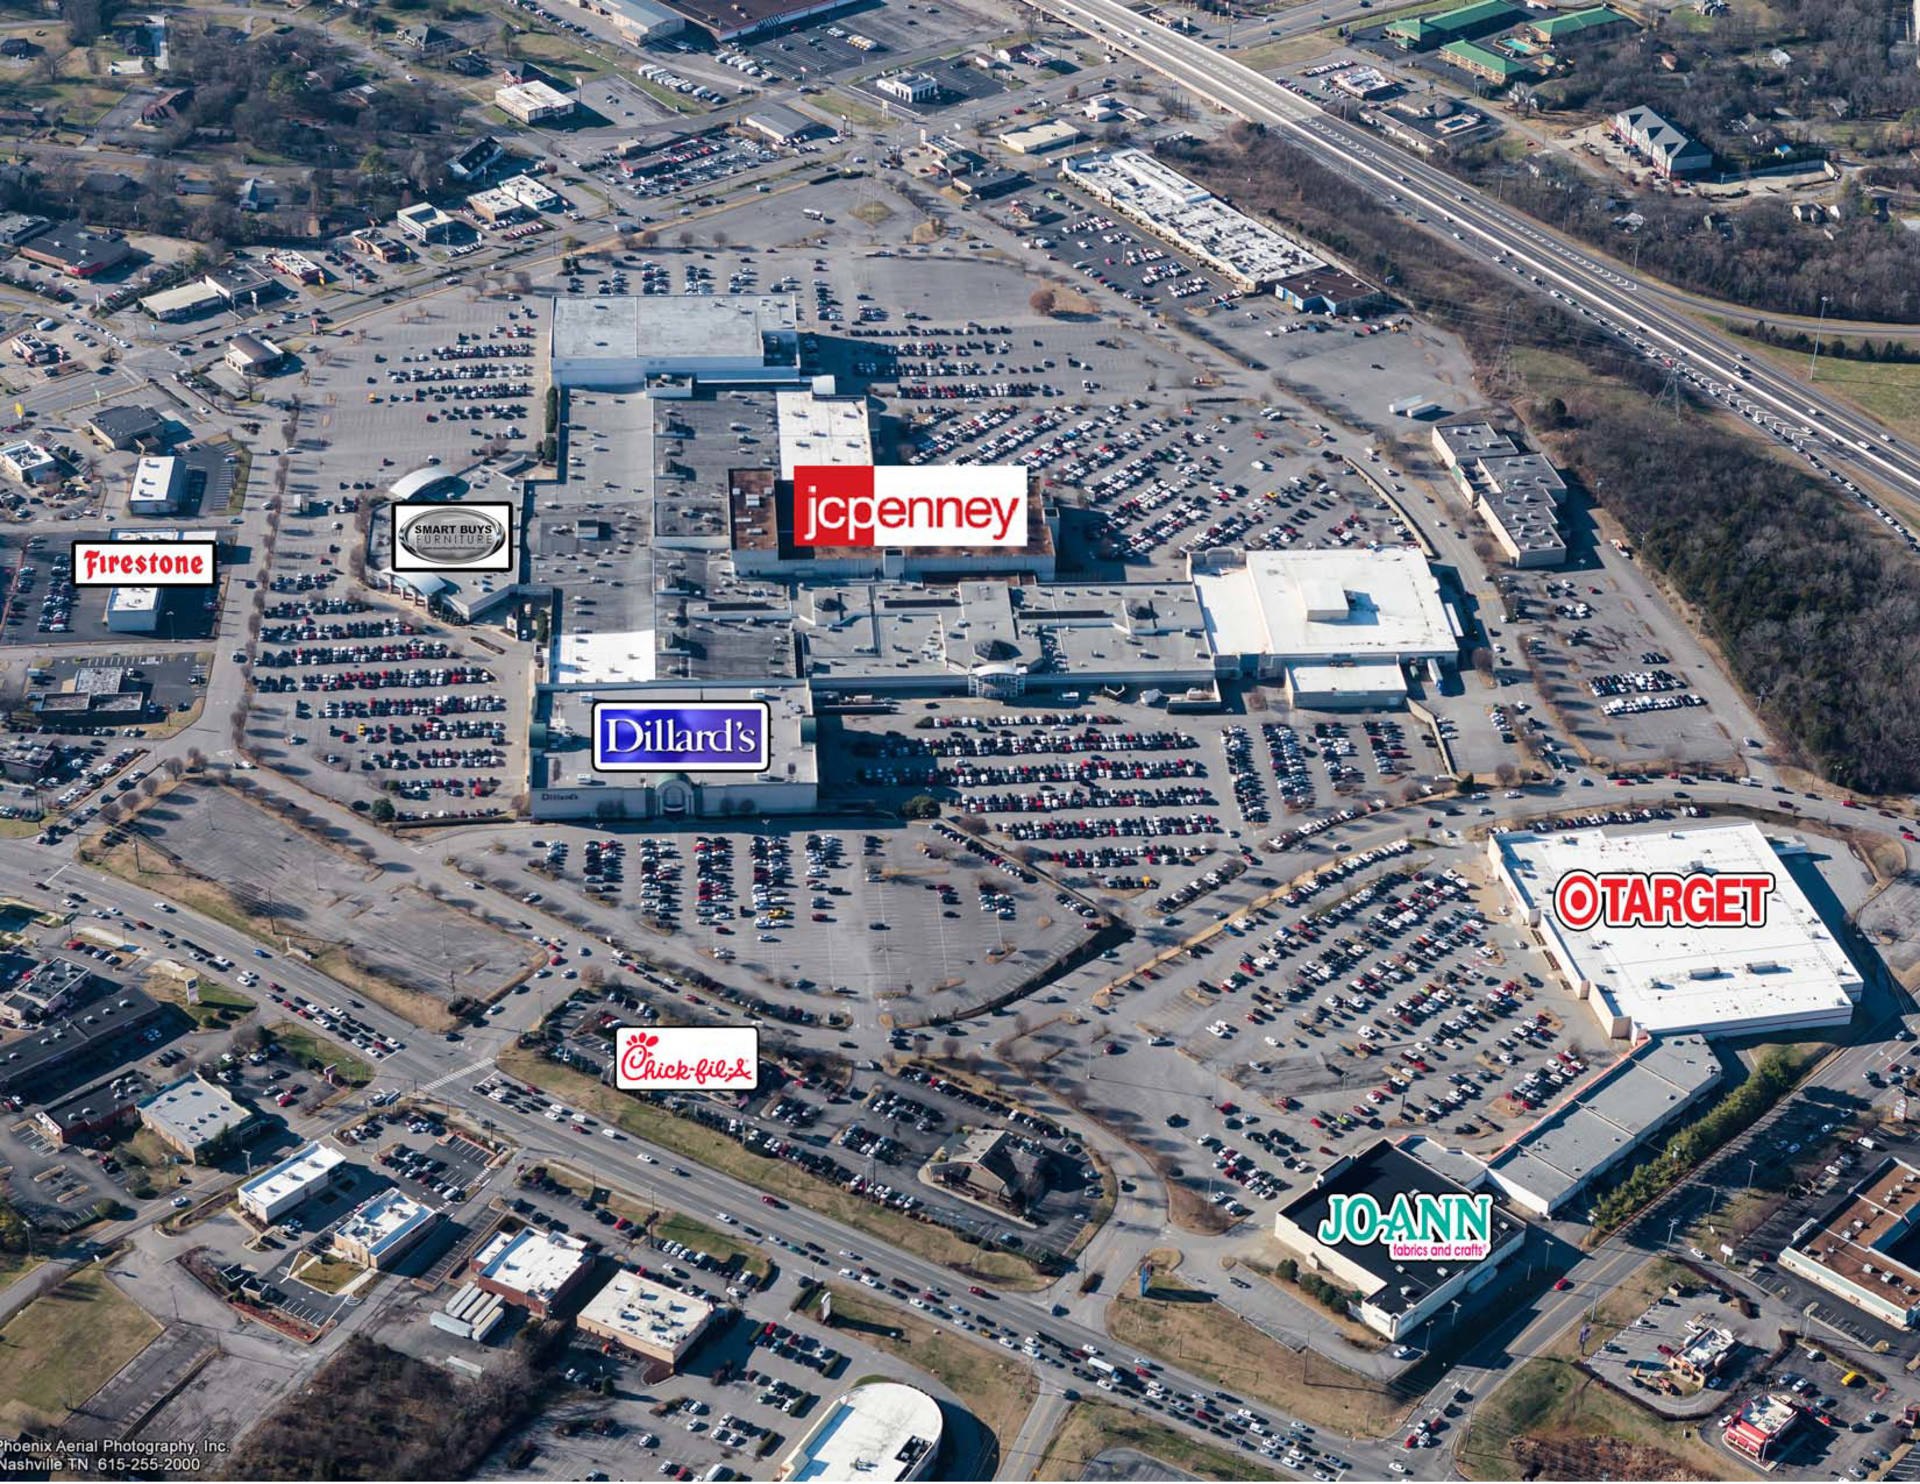 Goodlettsville TN: RIVERGATE MALL - Retail Space For Lease